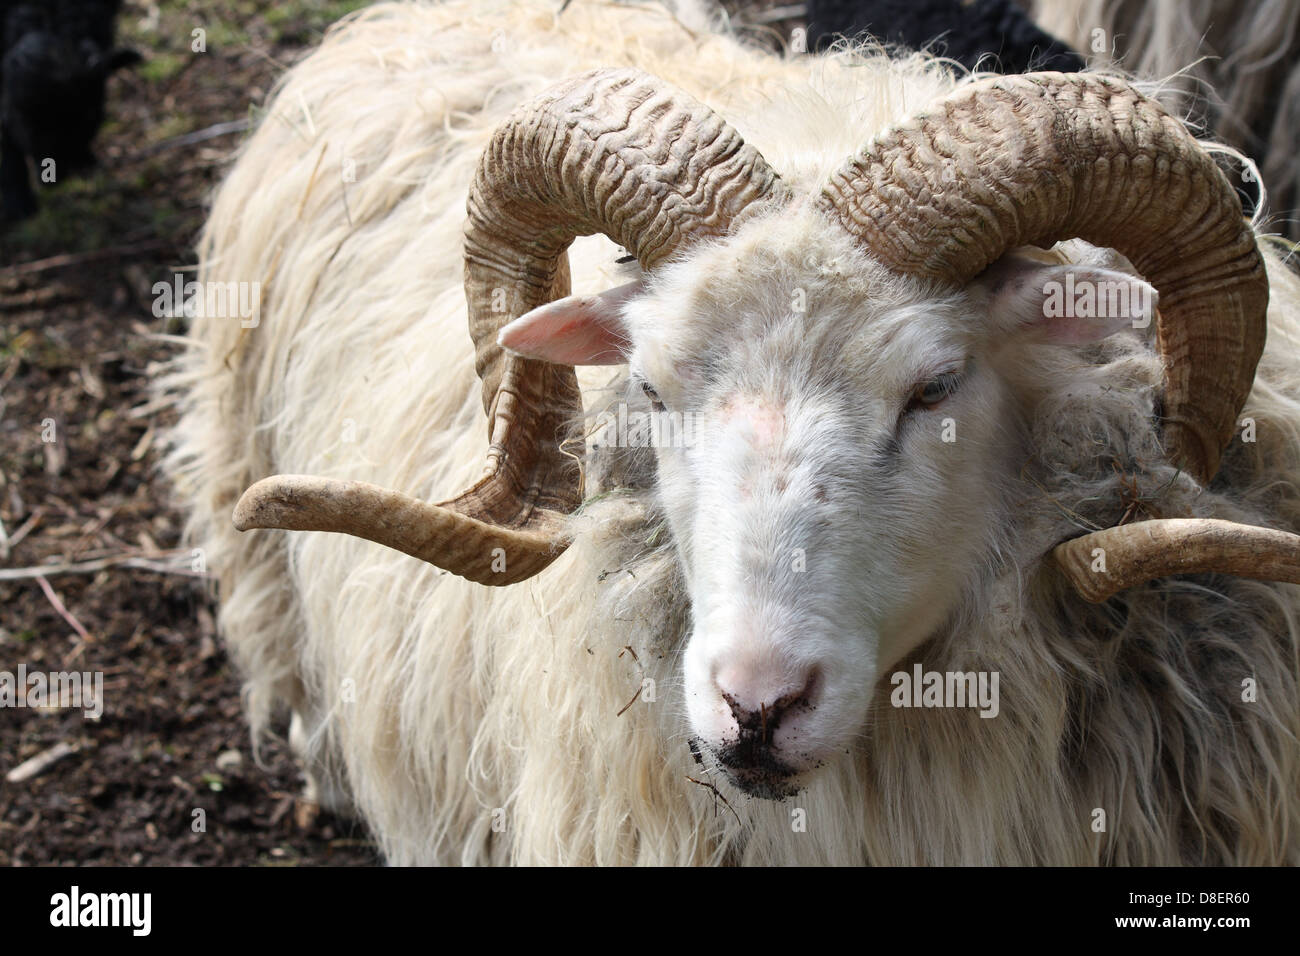 Portrait of a sheep with horns. Stock Photo